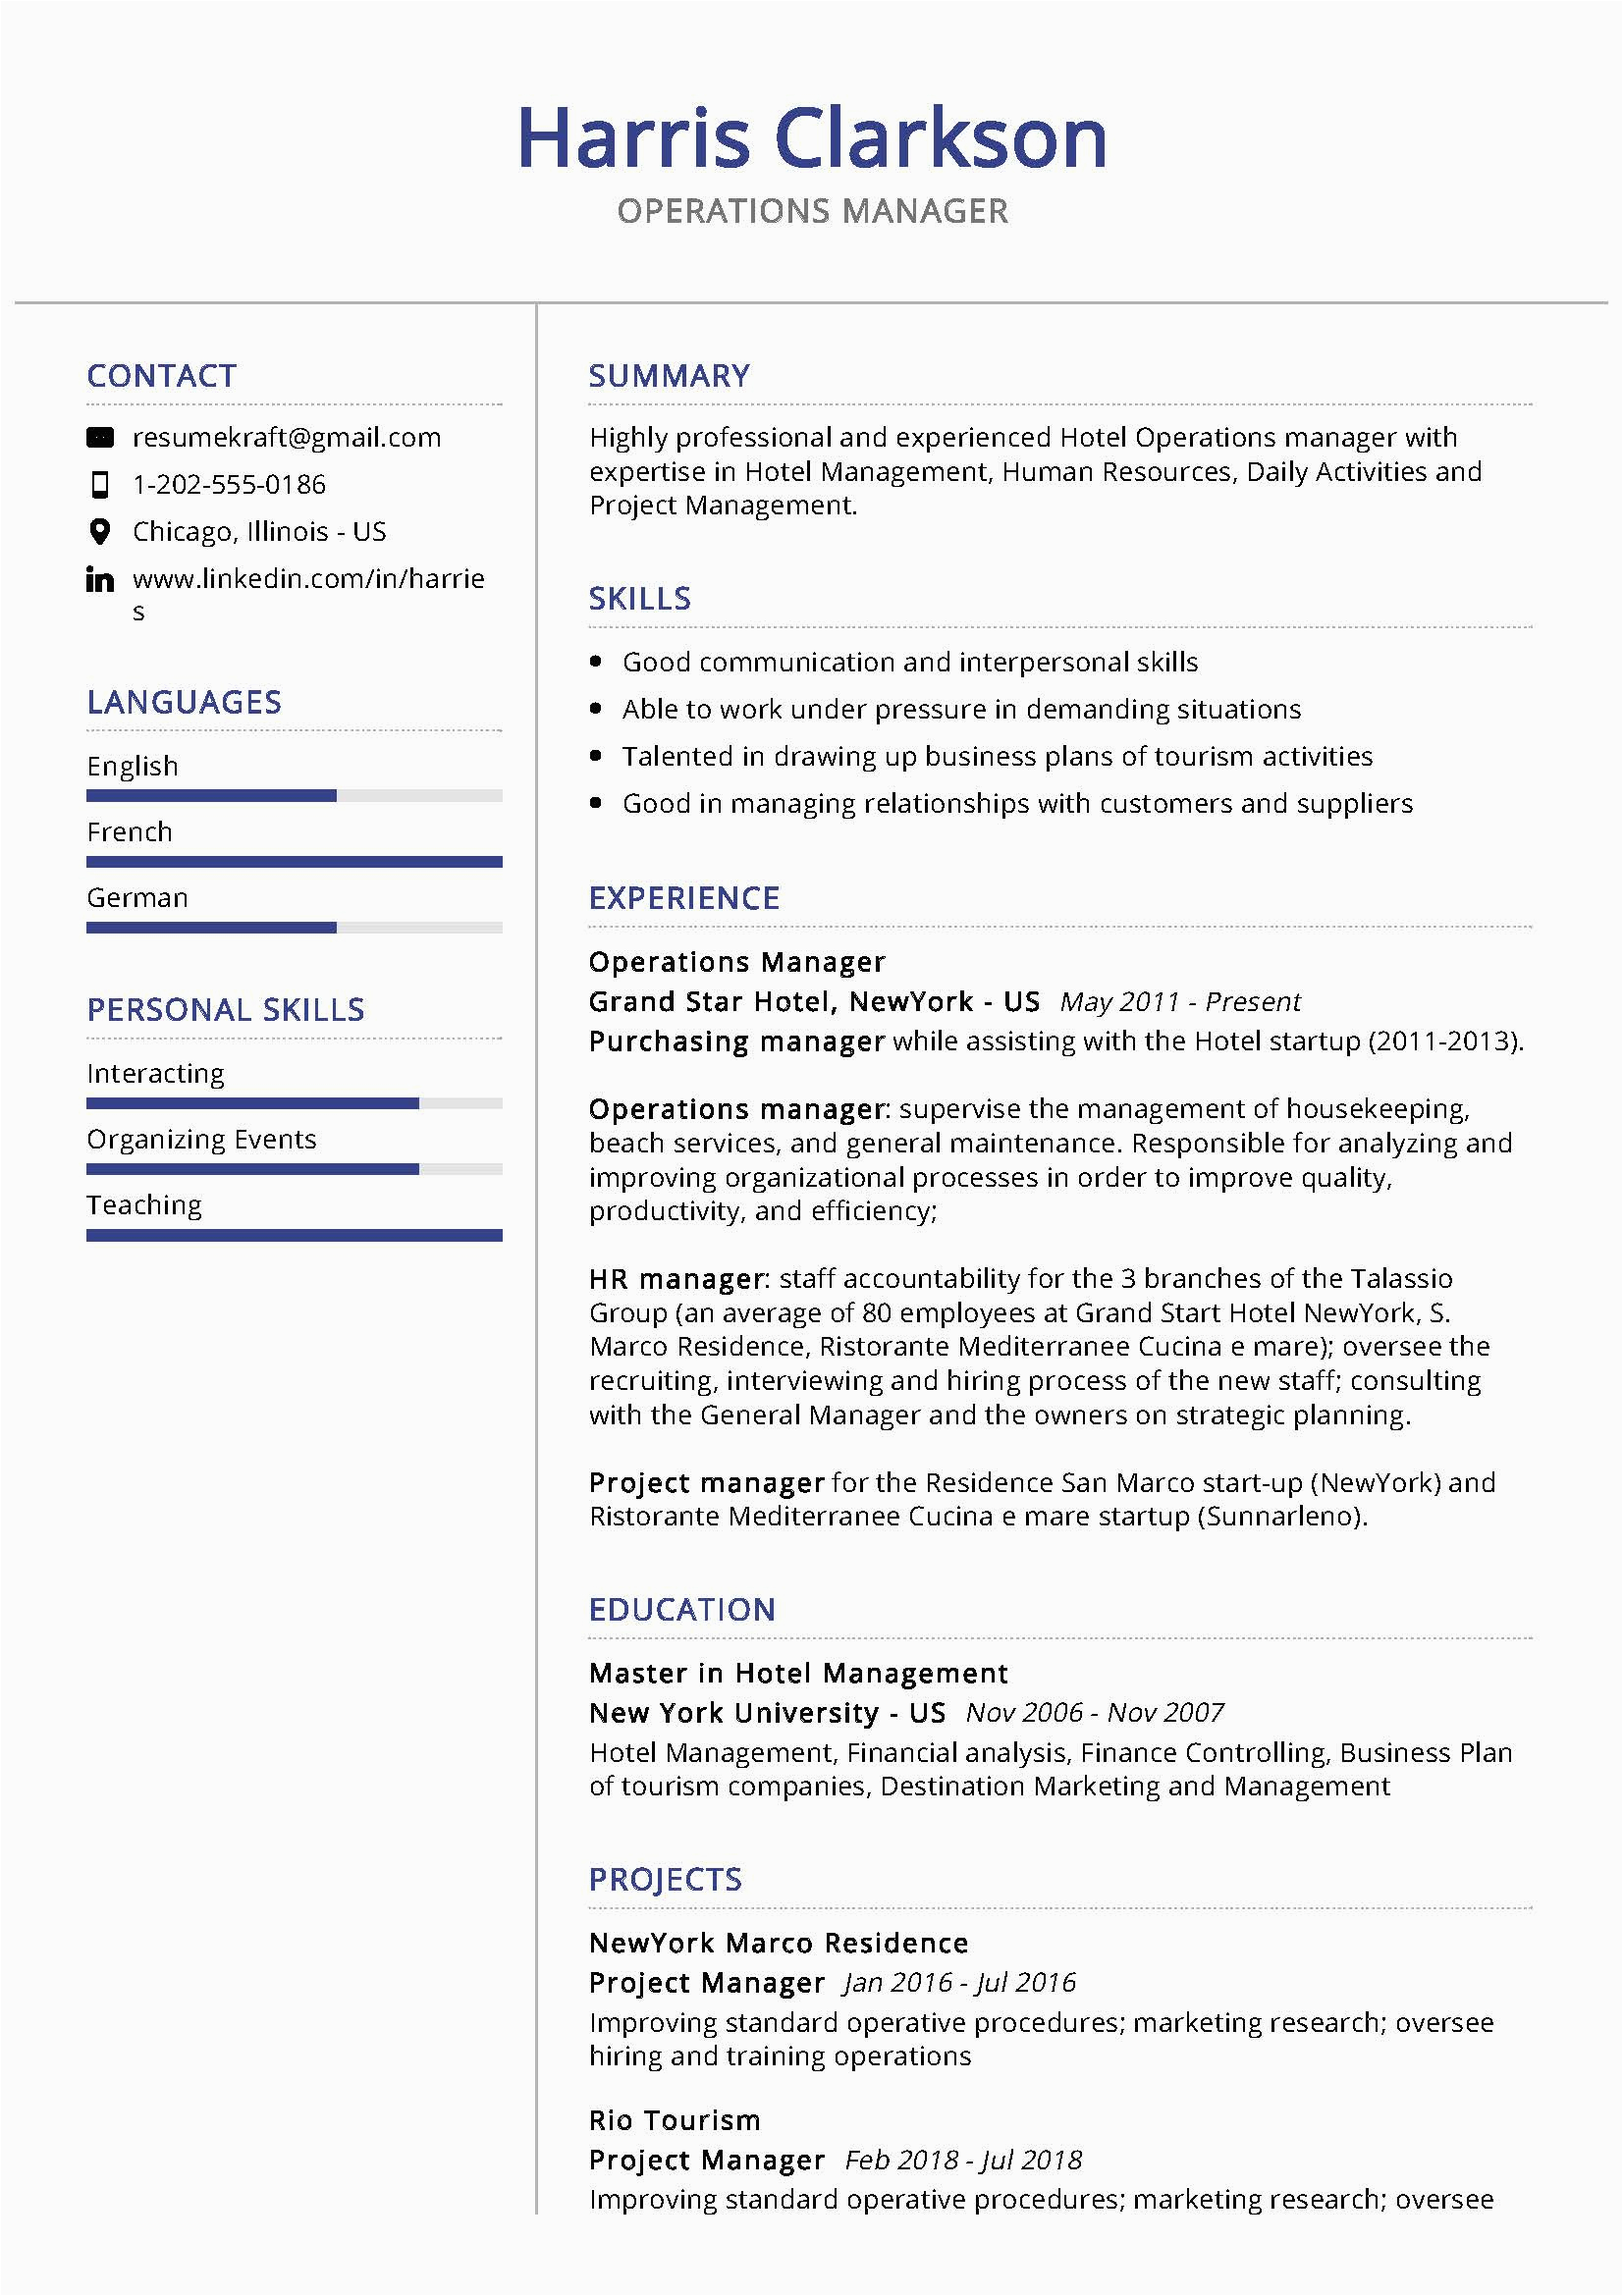 Resume Summary Sample for Operations Manager Operations Manager Resume Sample & Writing Tips 2020